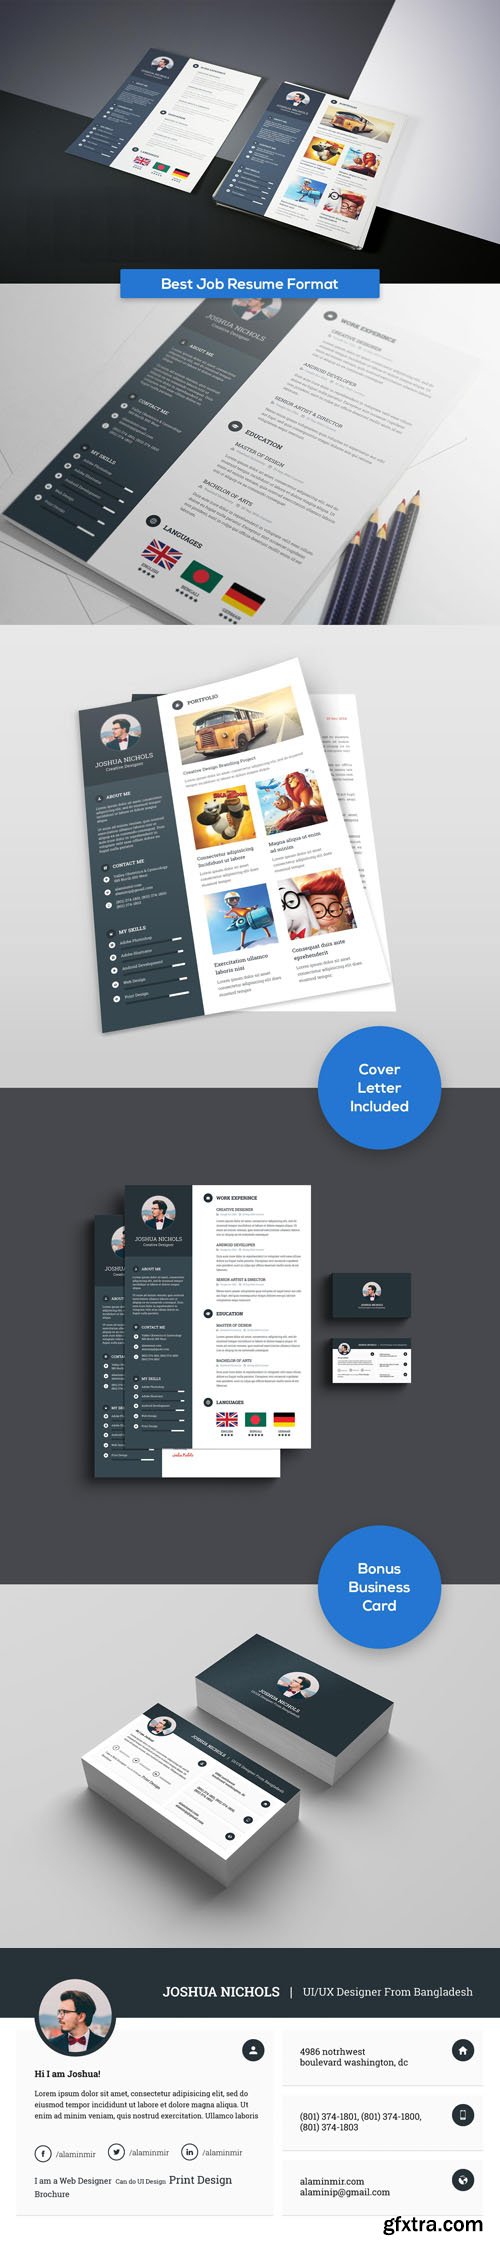 Best Job Resume Format PSD Templates with Business Card